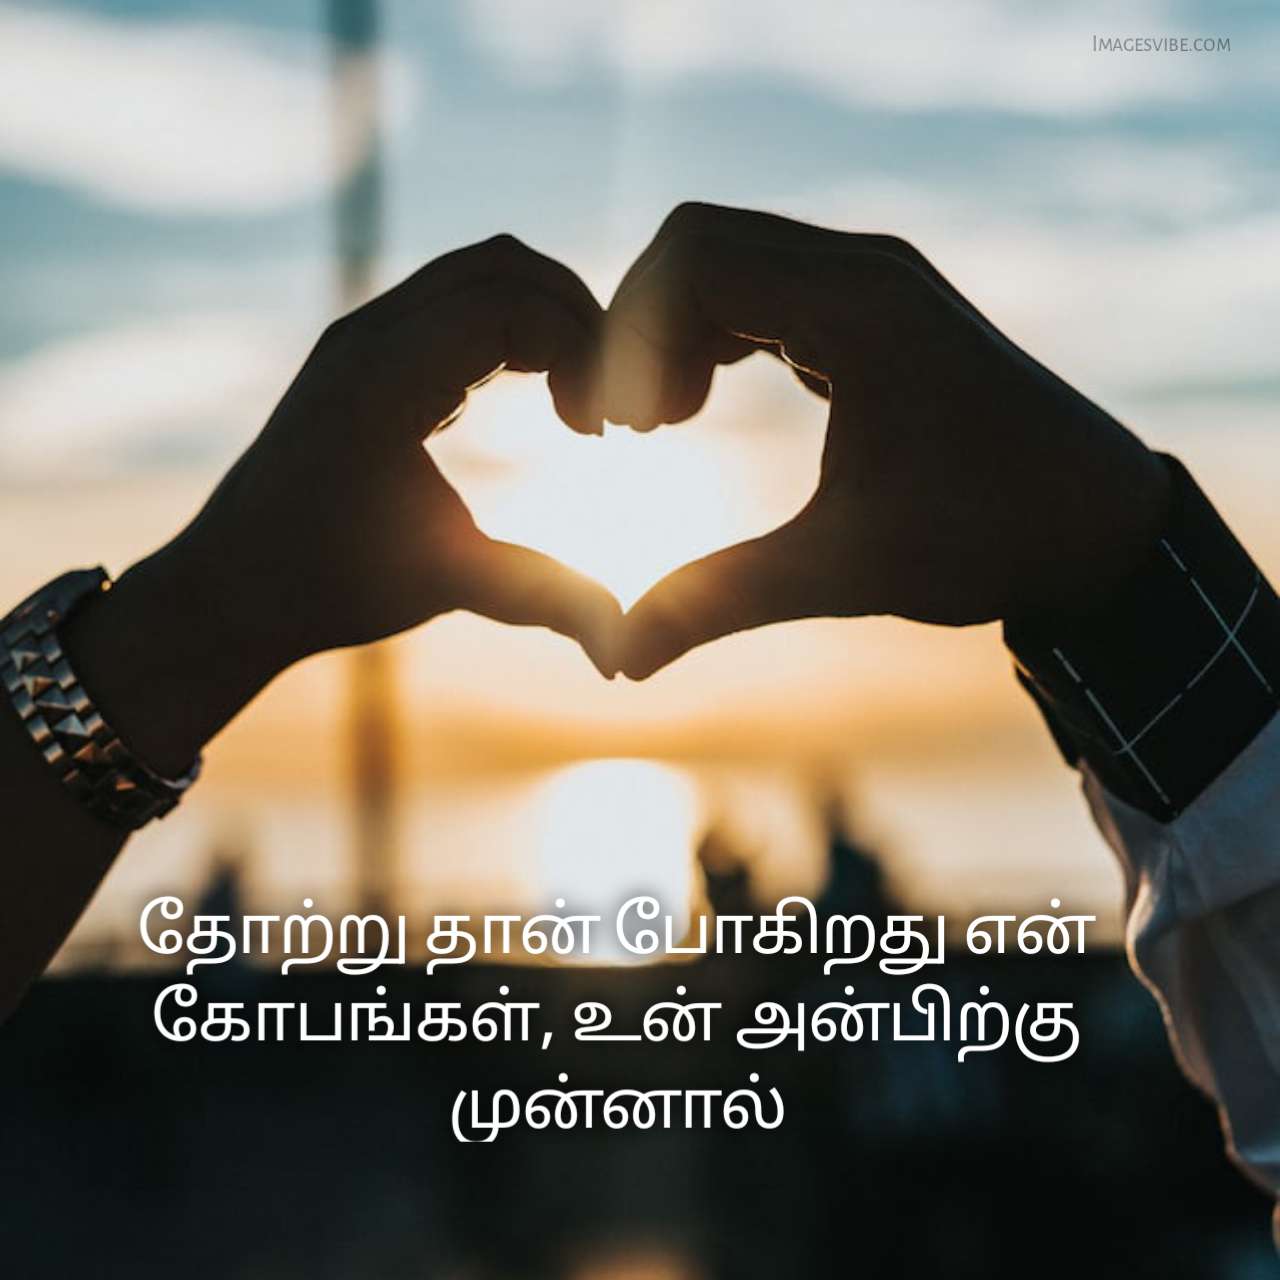 Love Quotes In Tamil8 